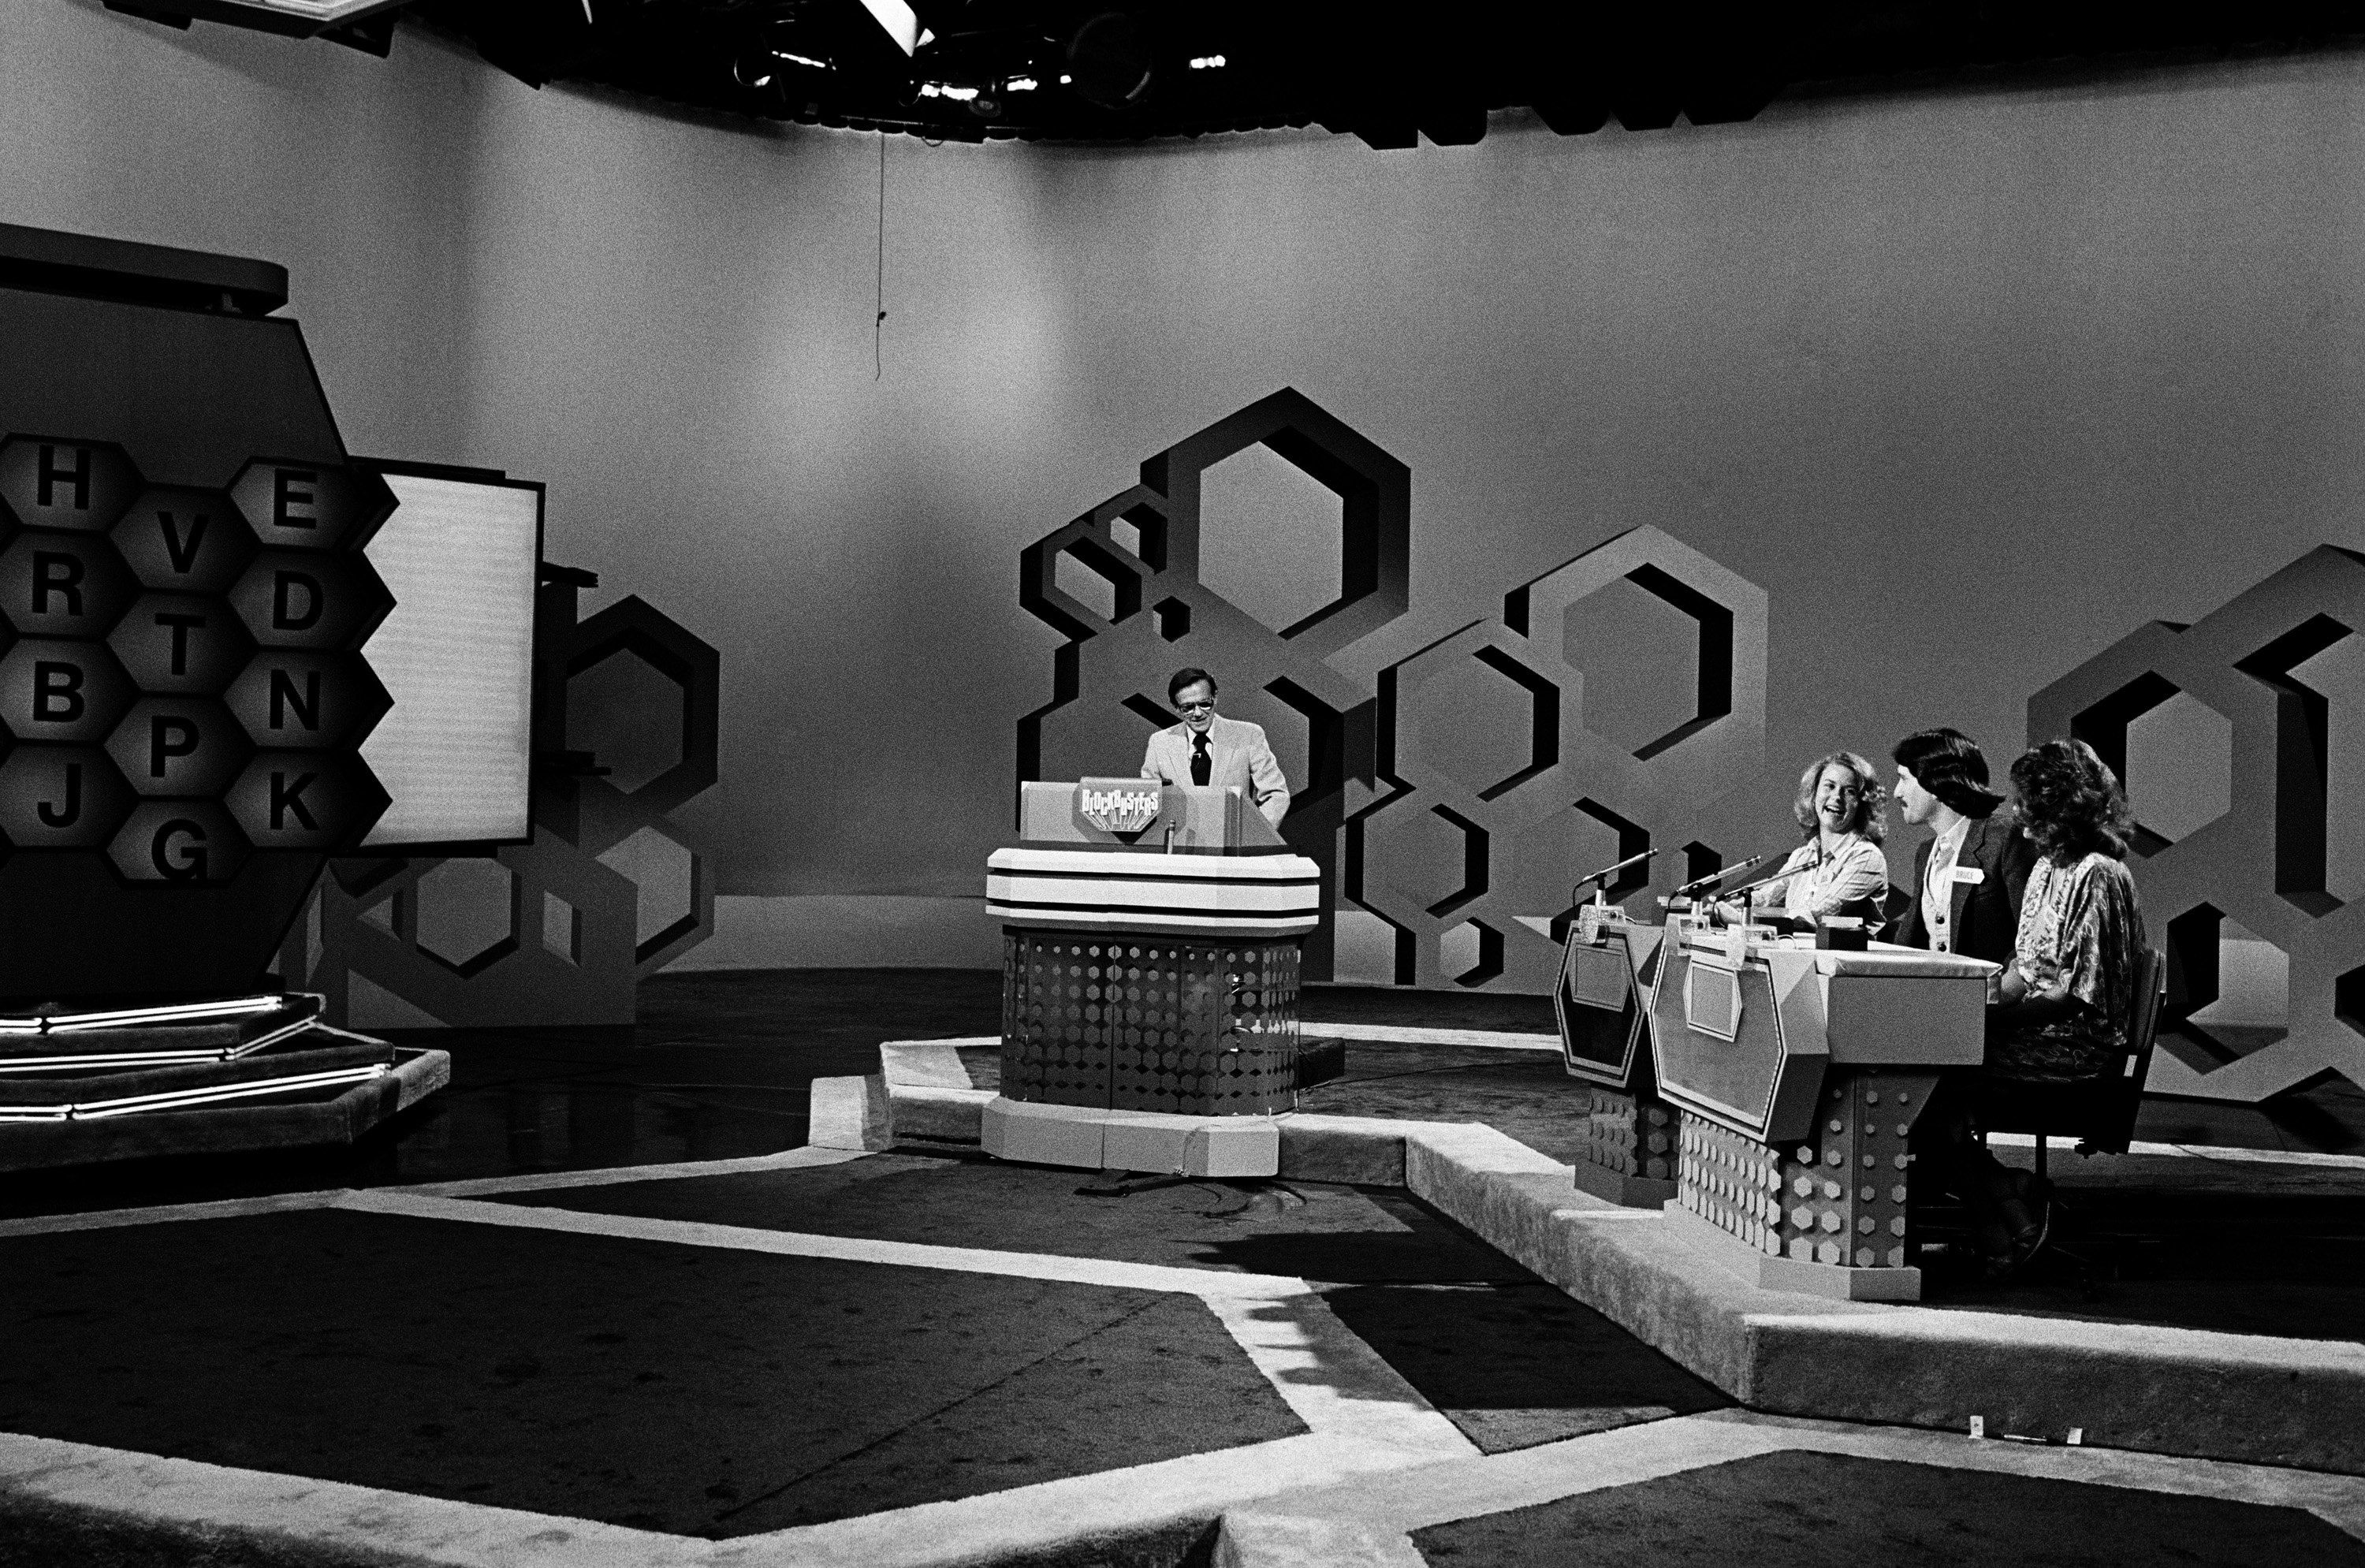 Game shows we want to see rebooted